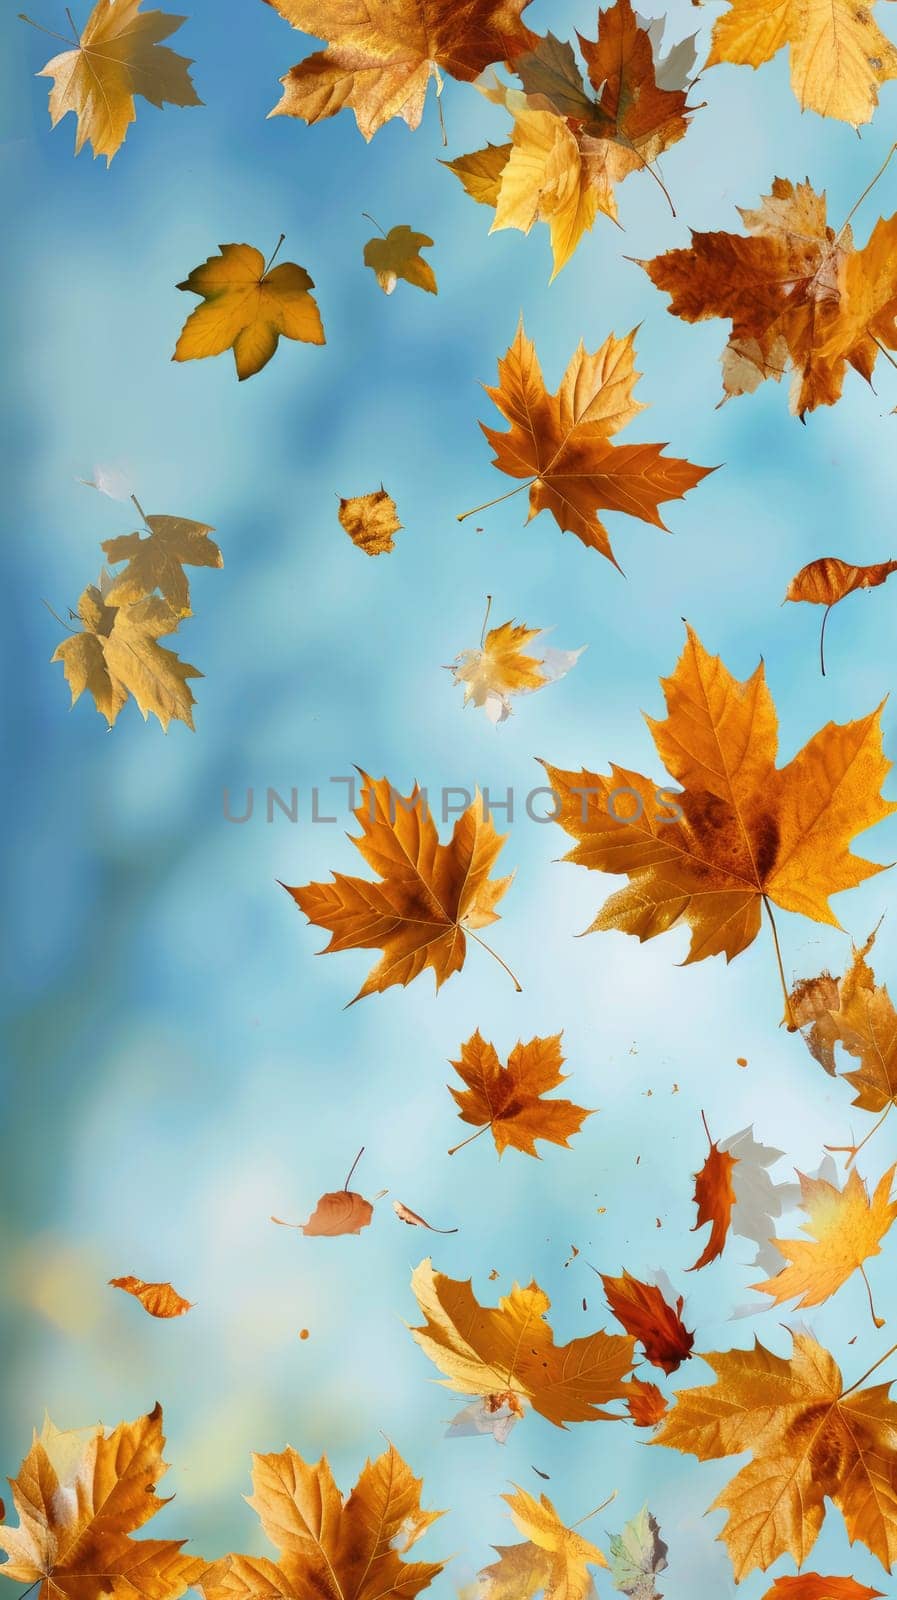 Maple leaves catch the wind, intoxicate the atmosphere of autumn freedom and lightness, creating a colorful picture of the autumn dance of nature.